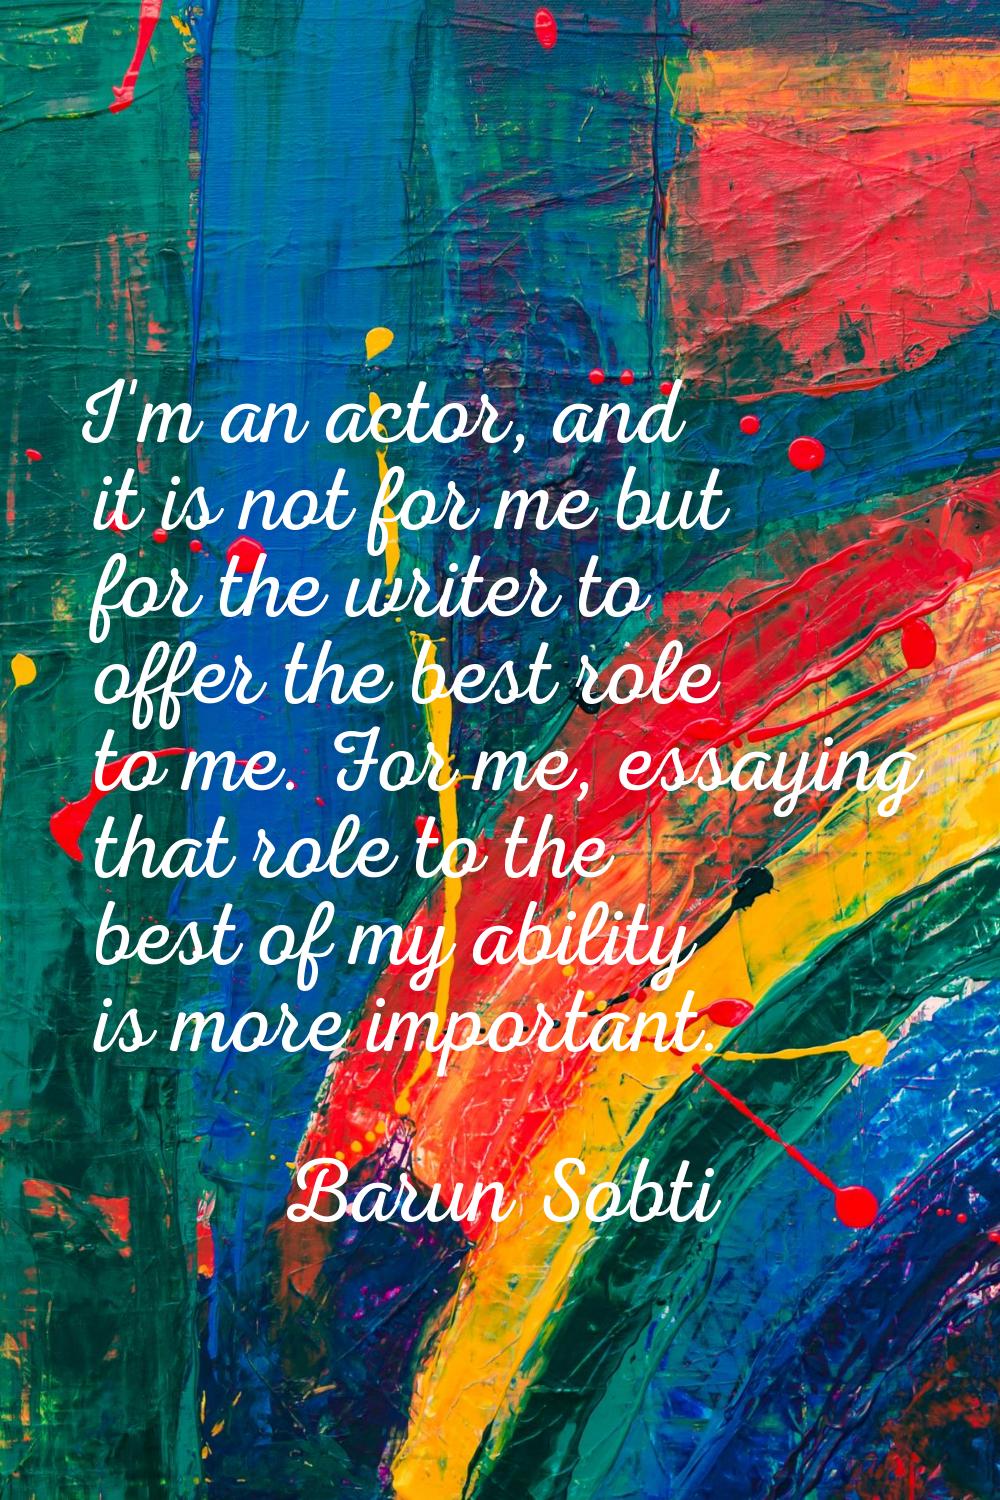 I'm an actor, and it is not for me but for the writer to offer the best role to me. For me, essayin